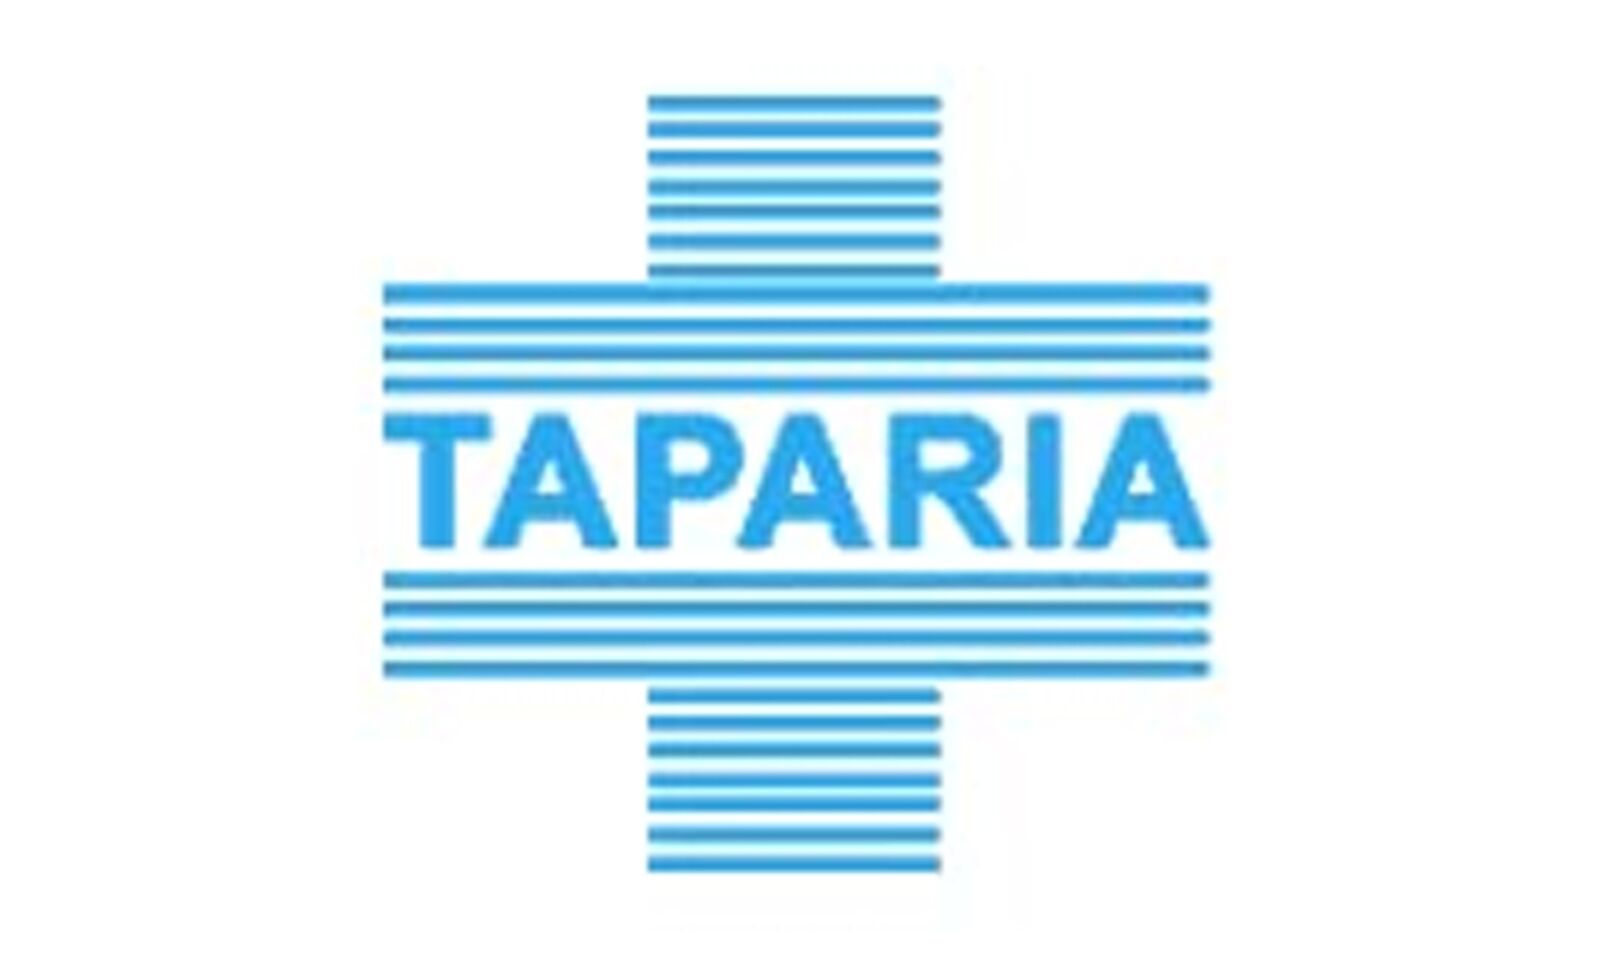 Why taparia tools are not traded | Taparia tools share news | Taparia tools  share #sharemarket - YouTube